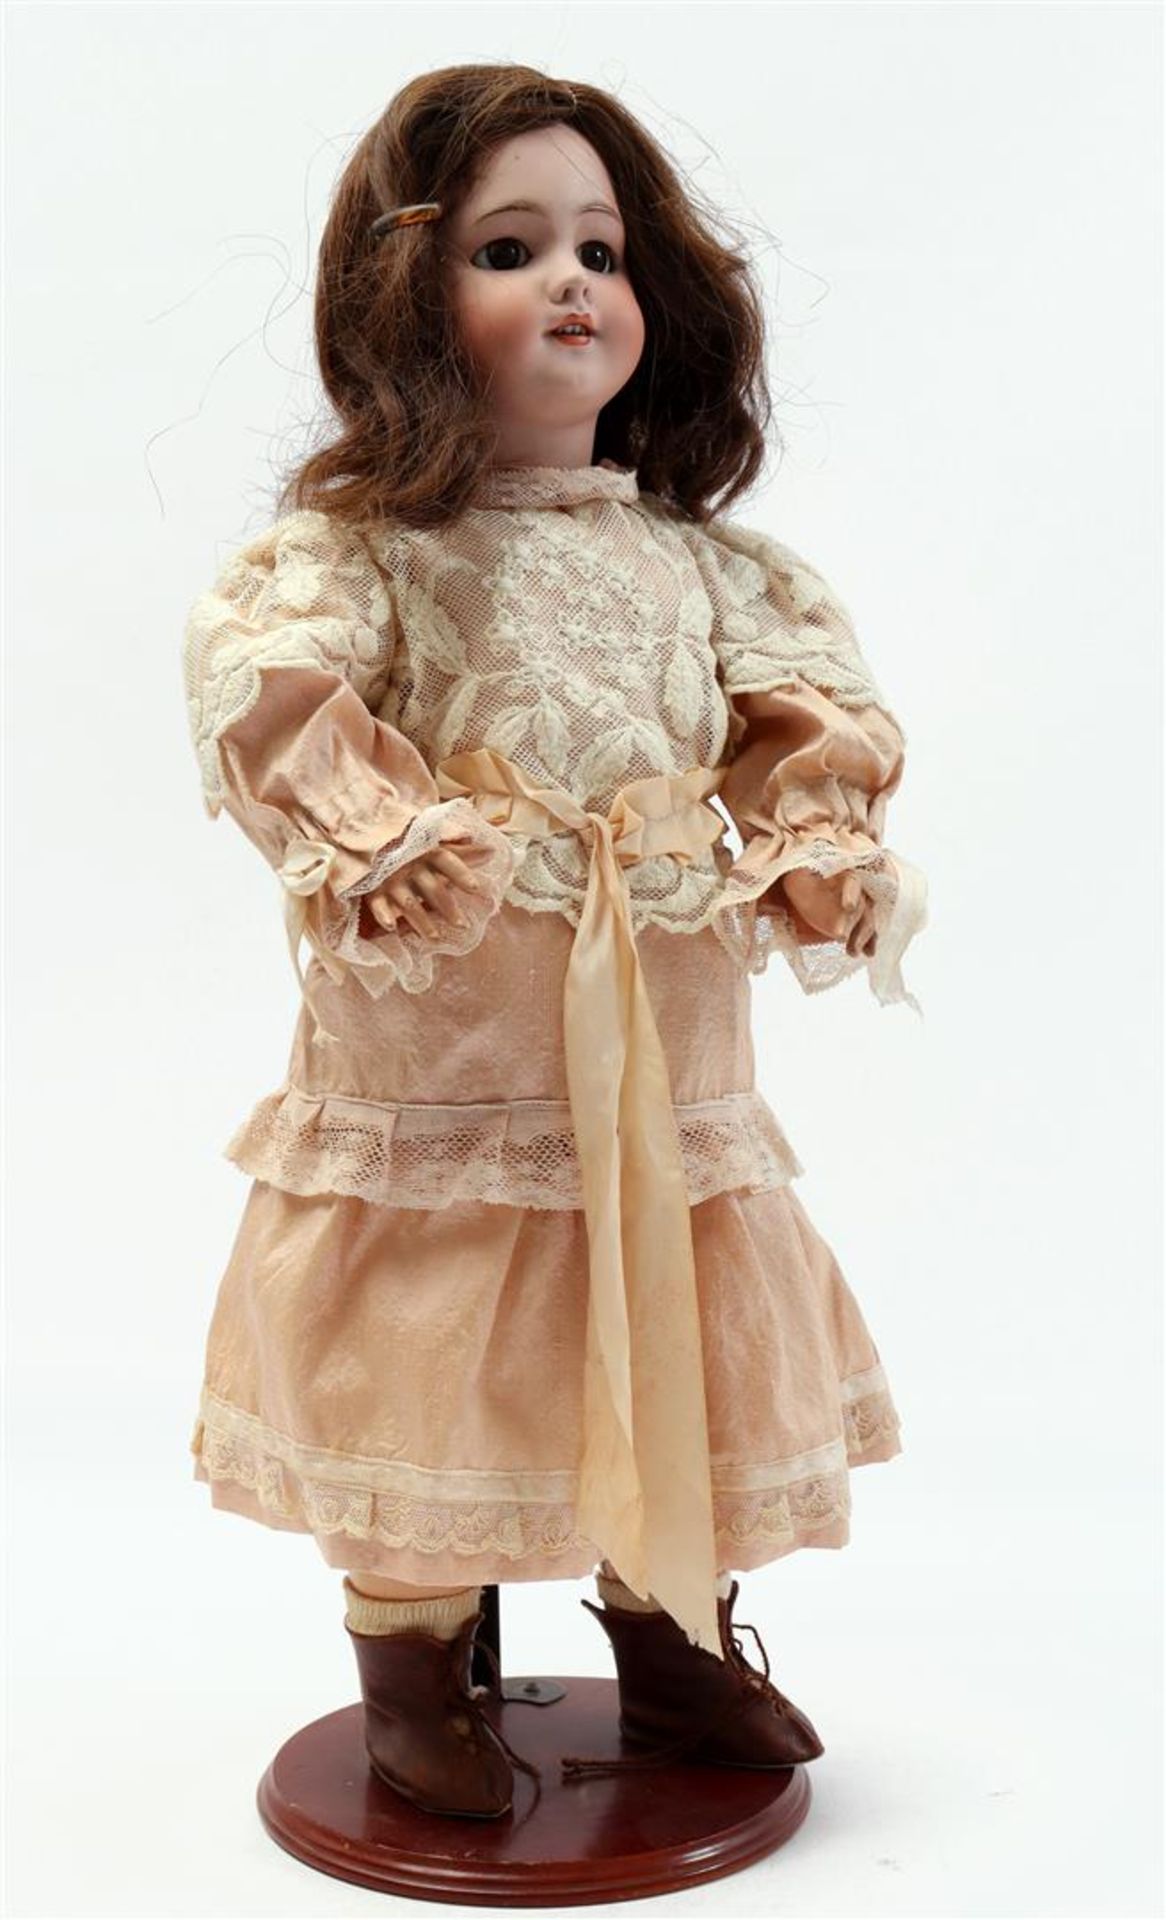 French porcelain doll